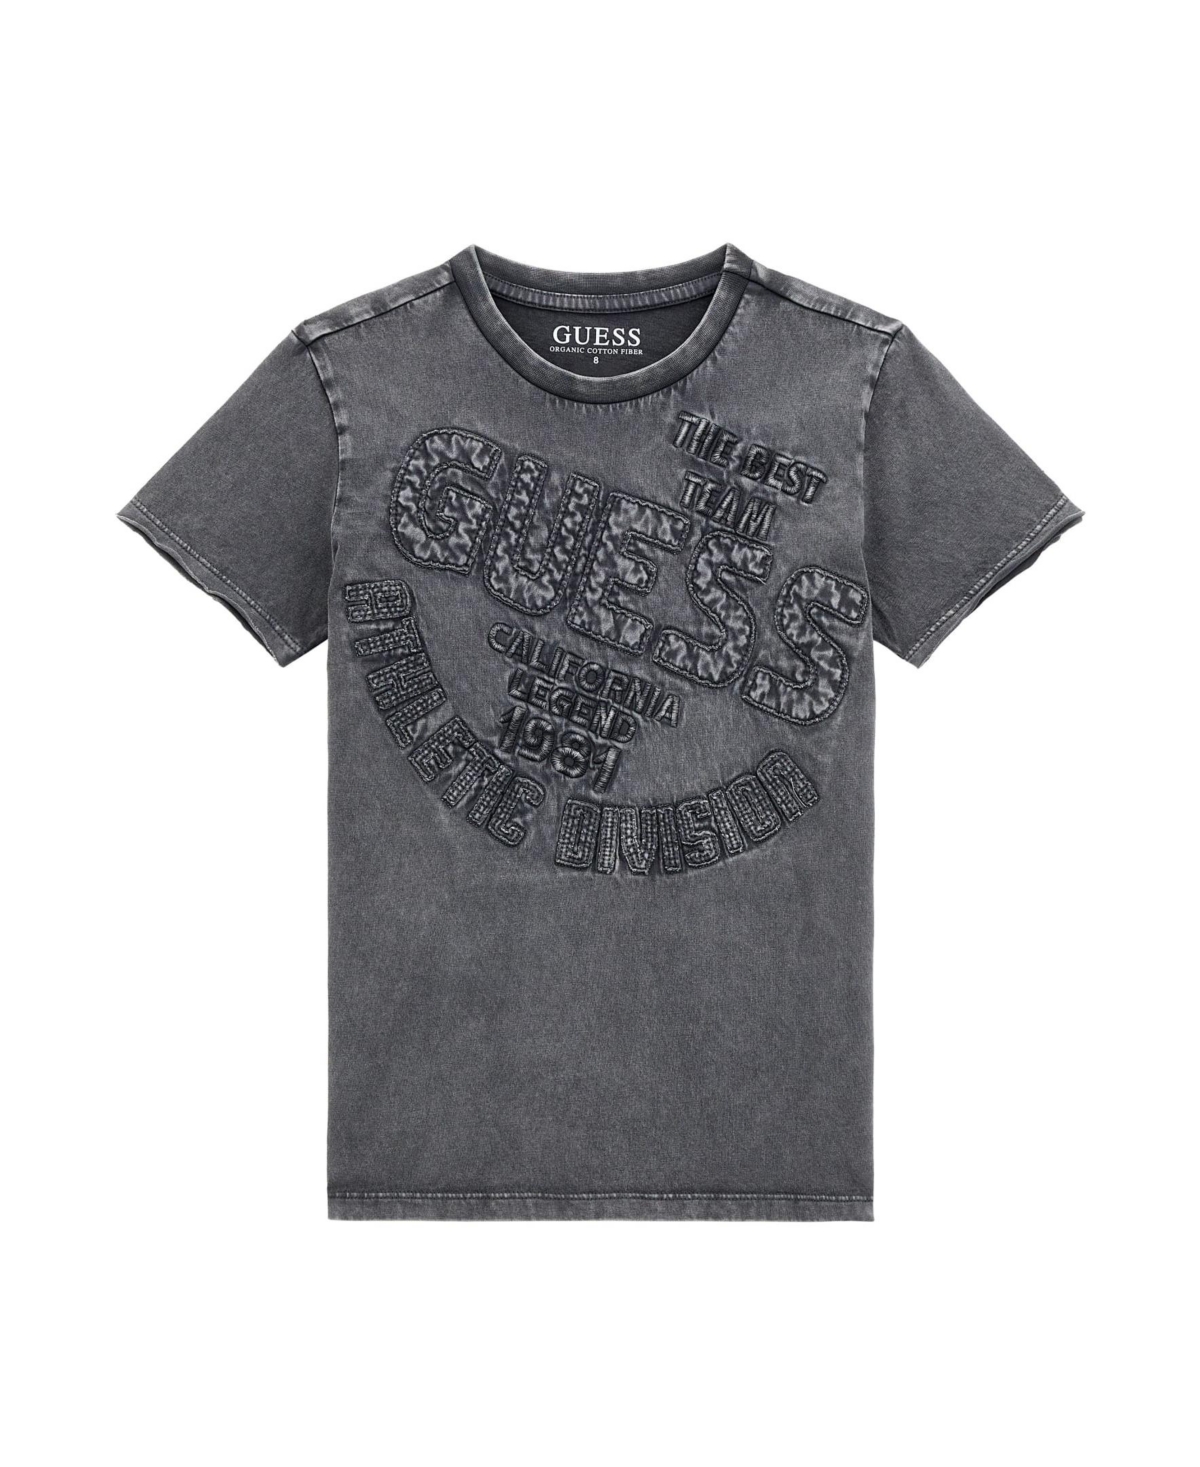 Guess Kids' Big Boys Cotton Jersey Short Sleeve T-shirt With Applique And Embroidered In Gray